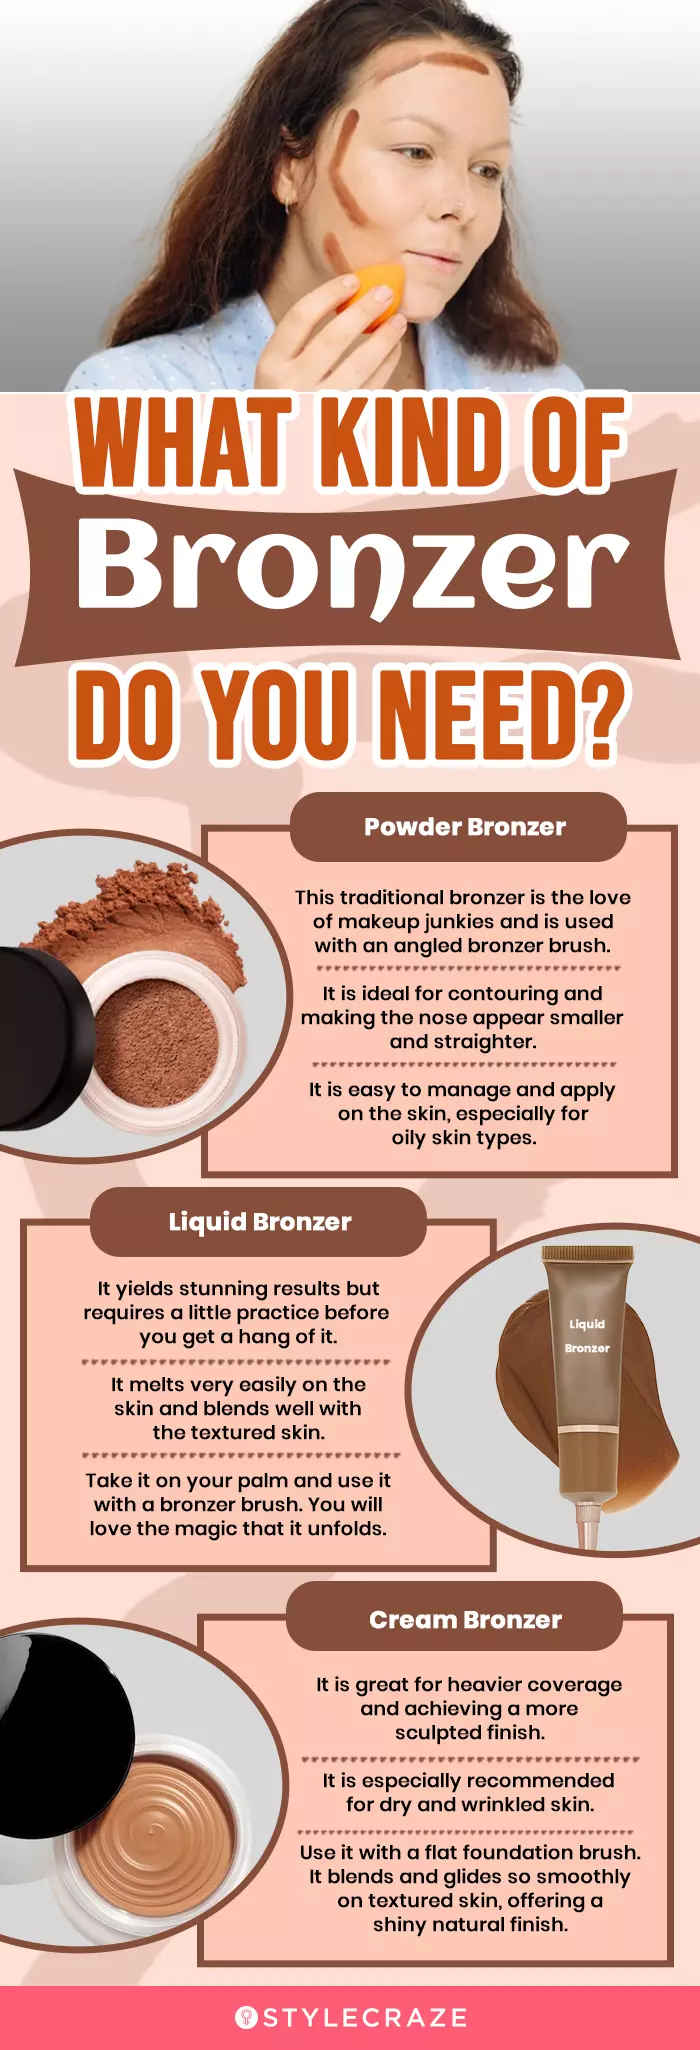 Different Types Of Bronzer And Their Benefits (infographic)